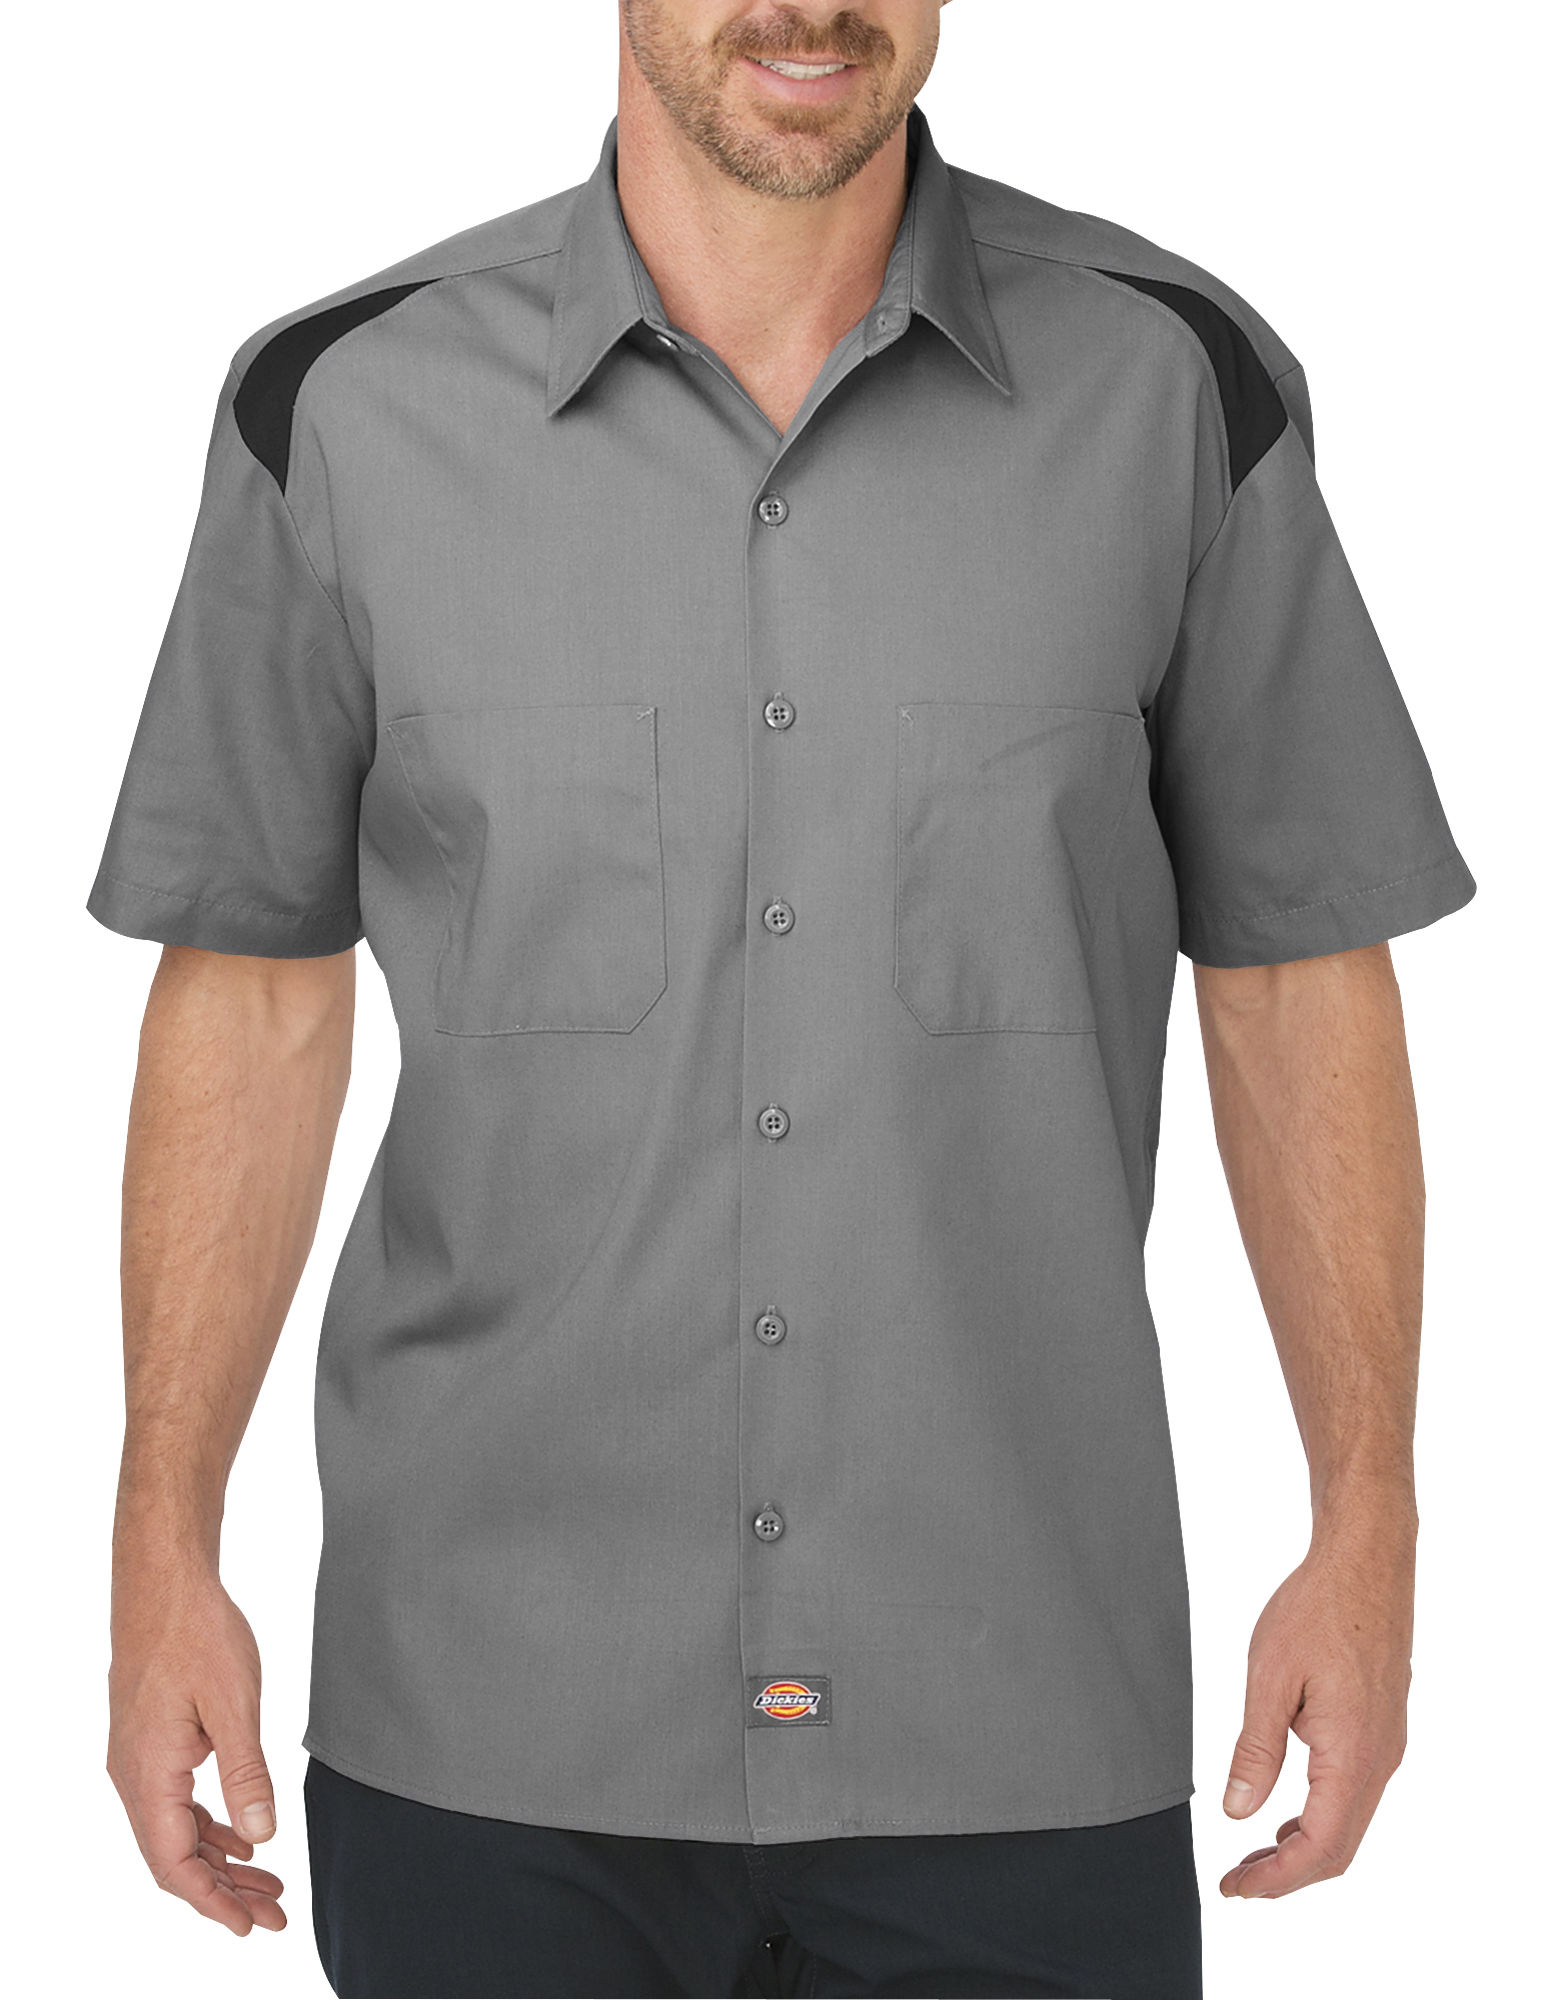 Buy LS605 Dow Auto Shirt - Online at Best price - IA